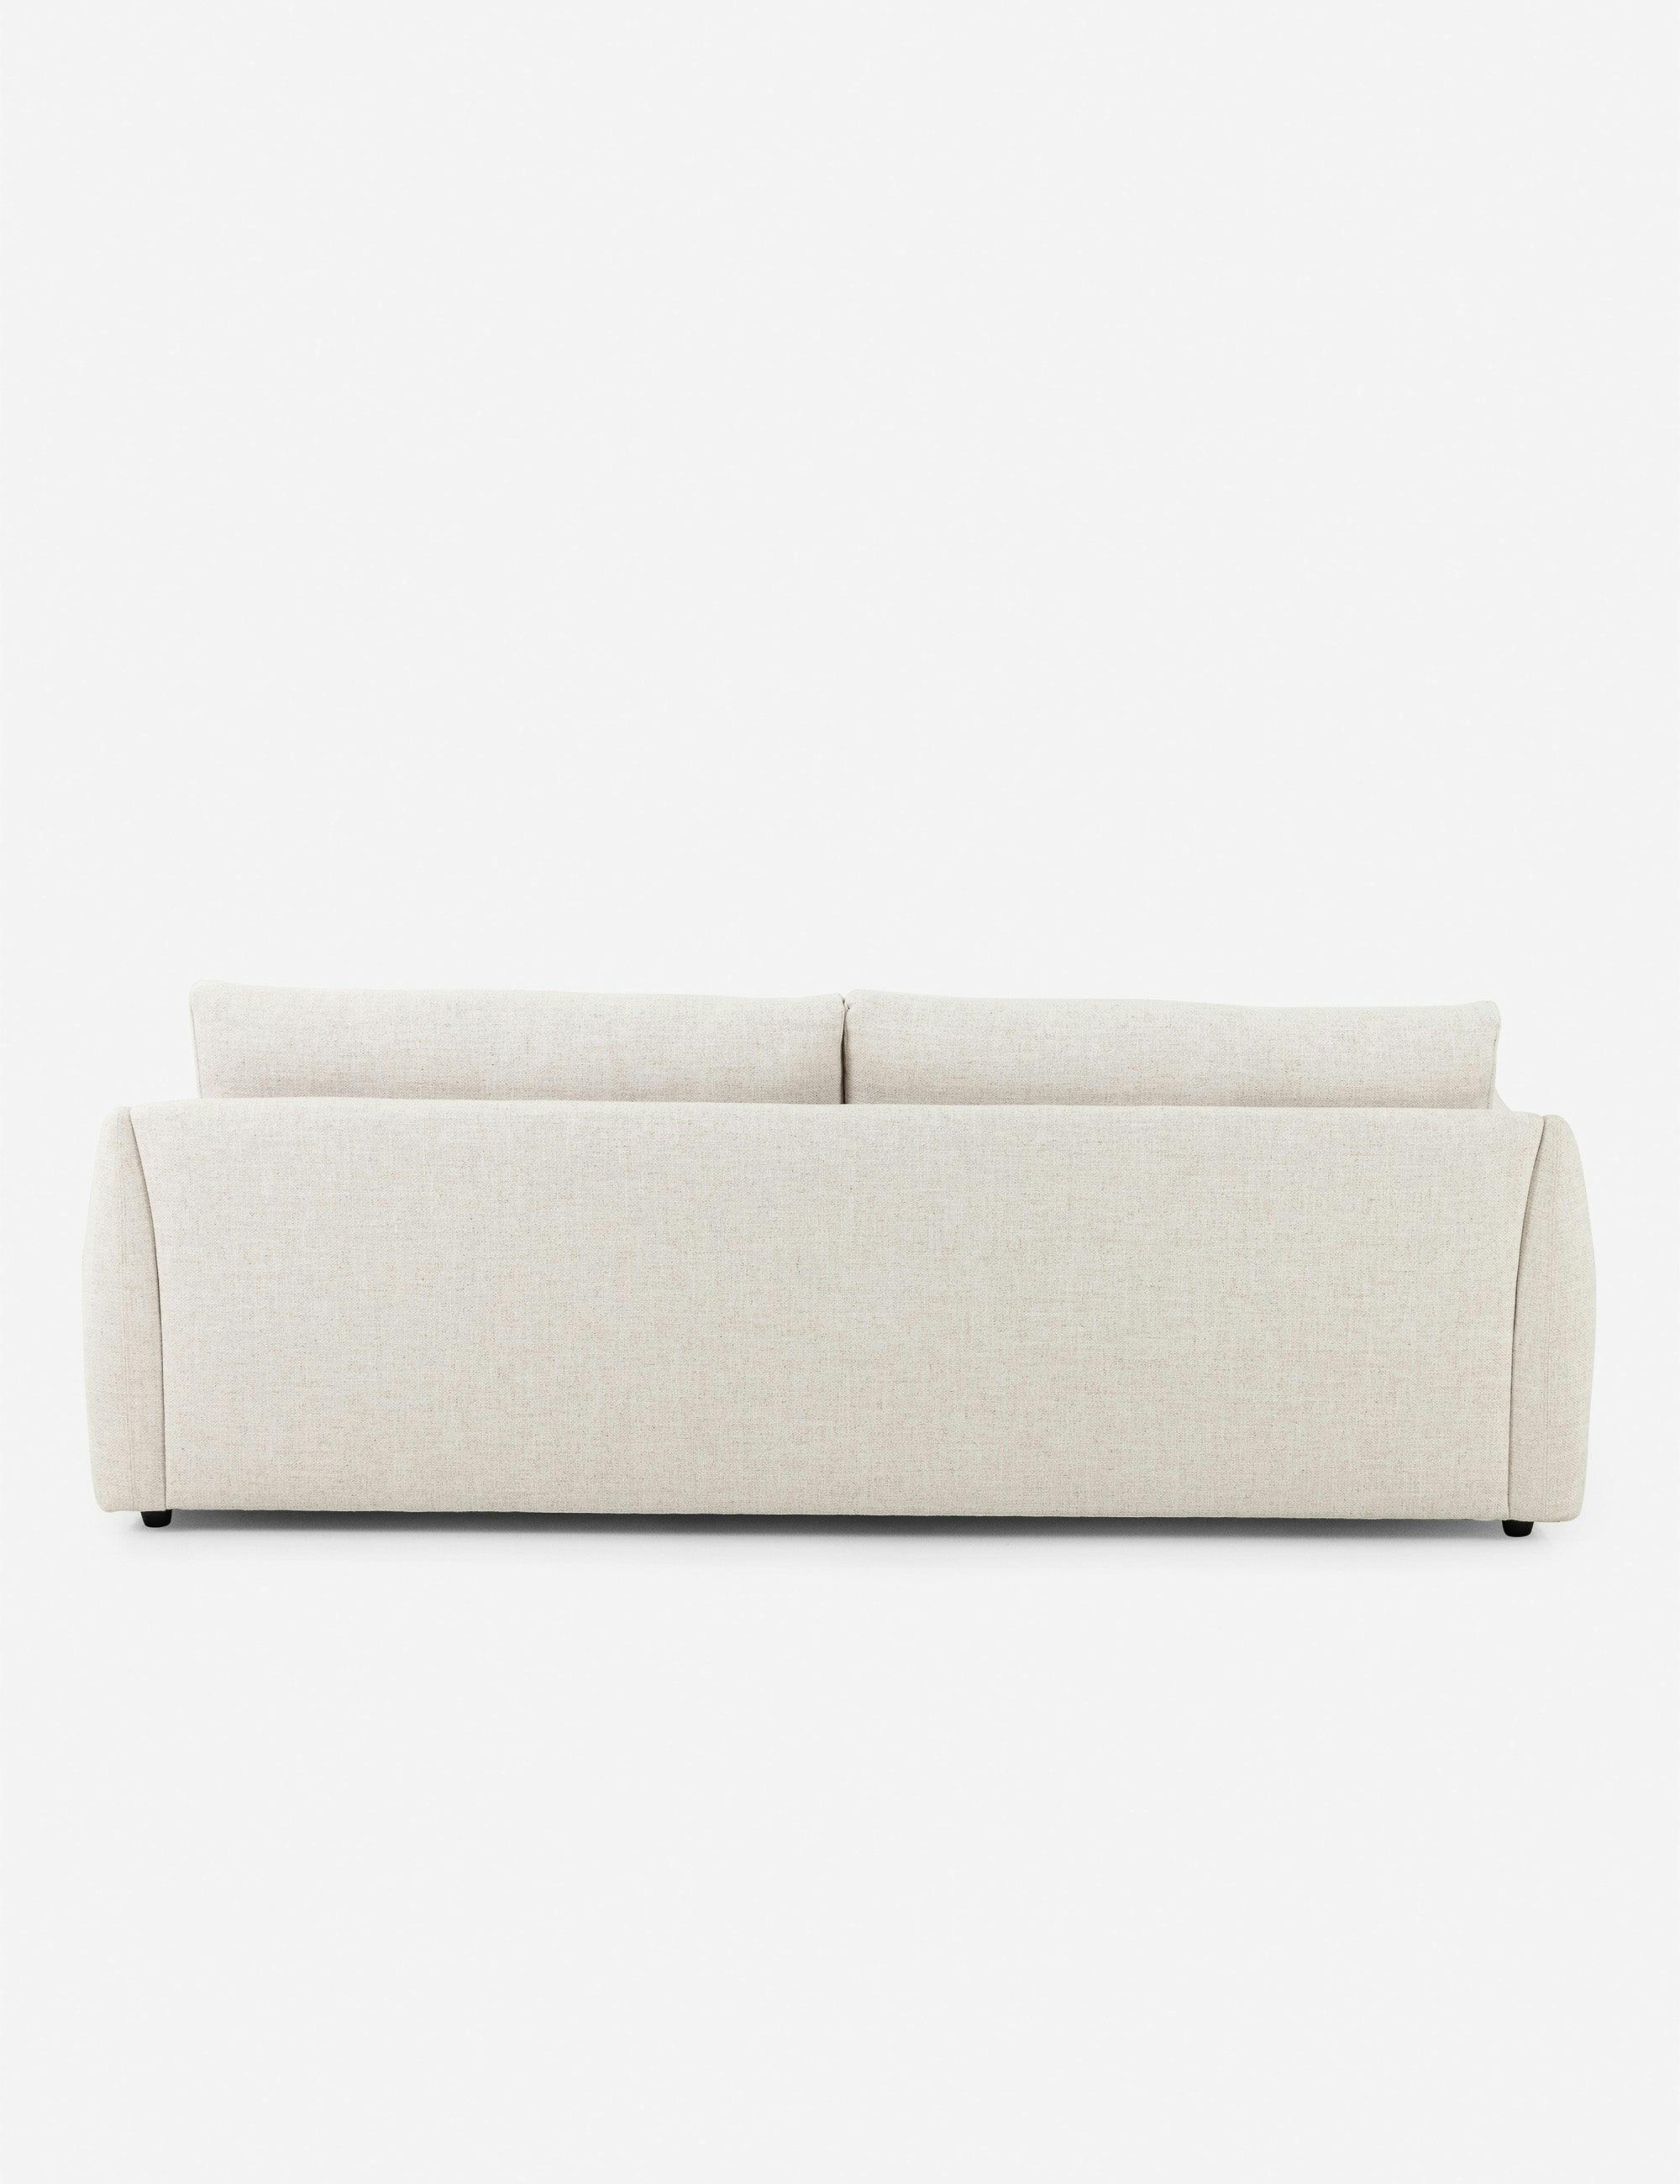 Dover Crescent Tufted Track Arm Sofa with Wood Accents